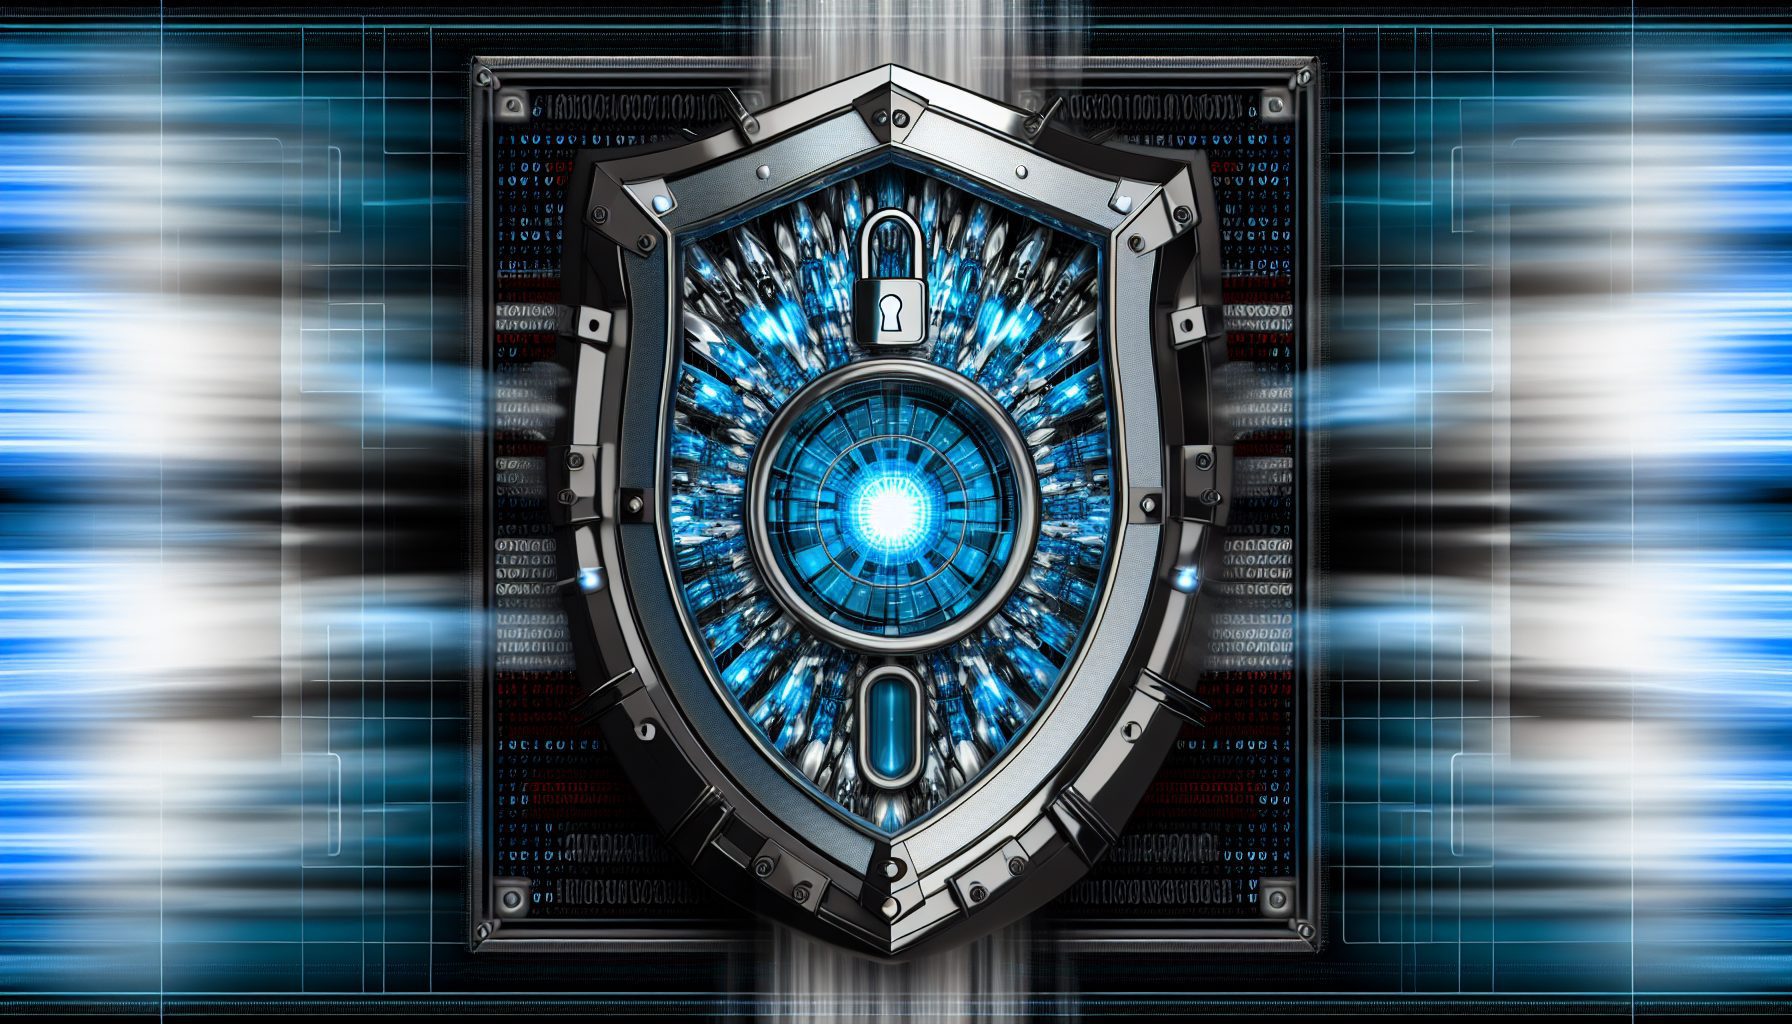 Photo of a shield symbolizing protection against data breaches and emergency access feature